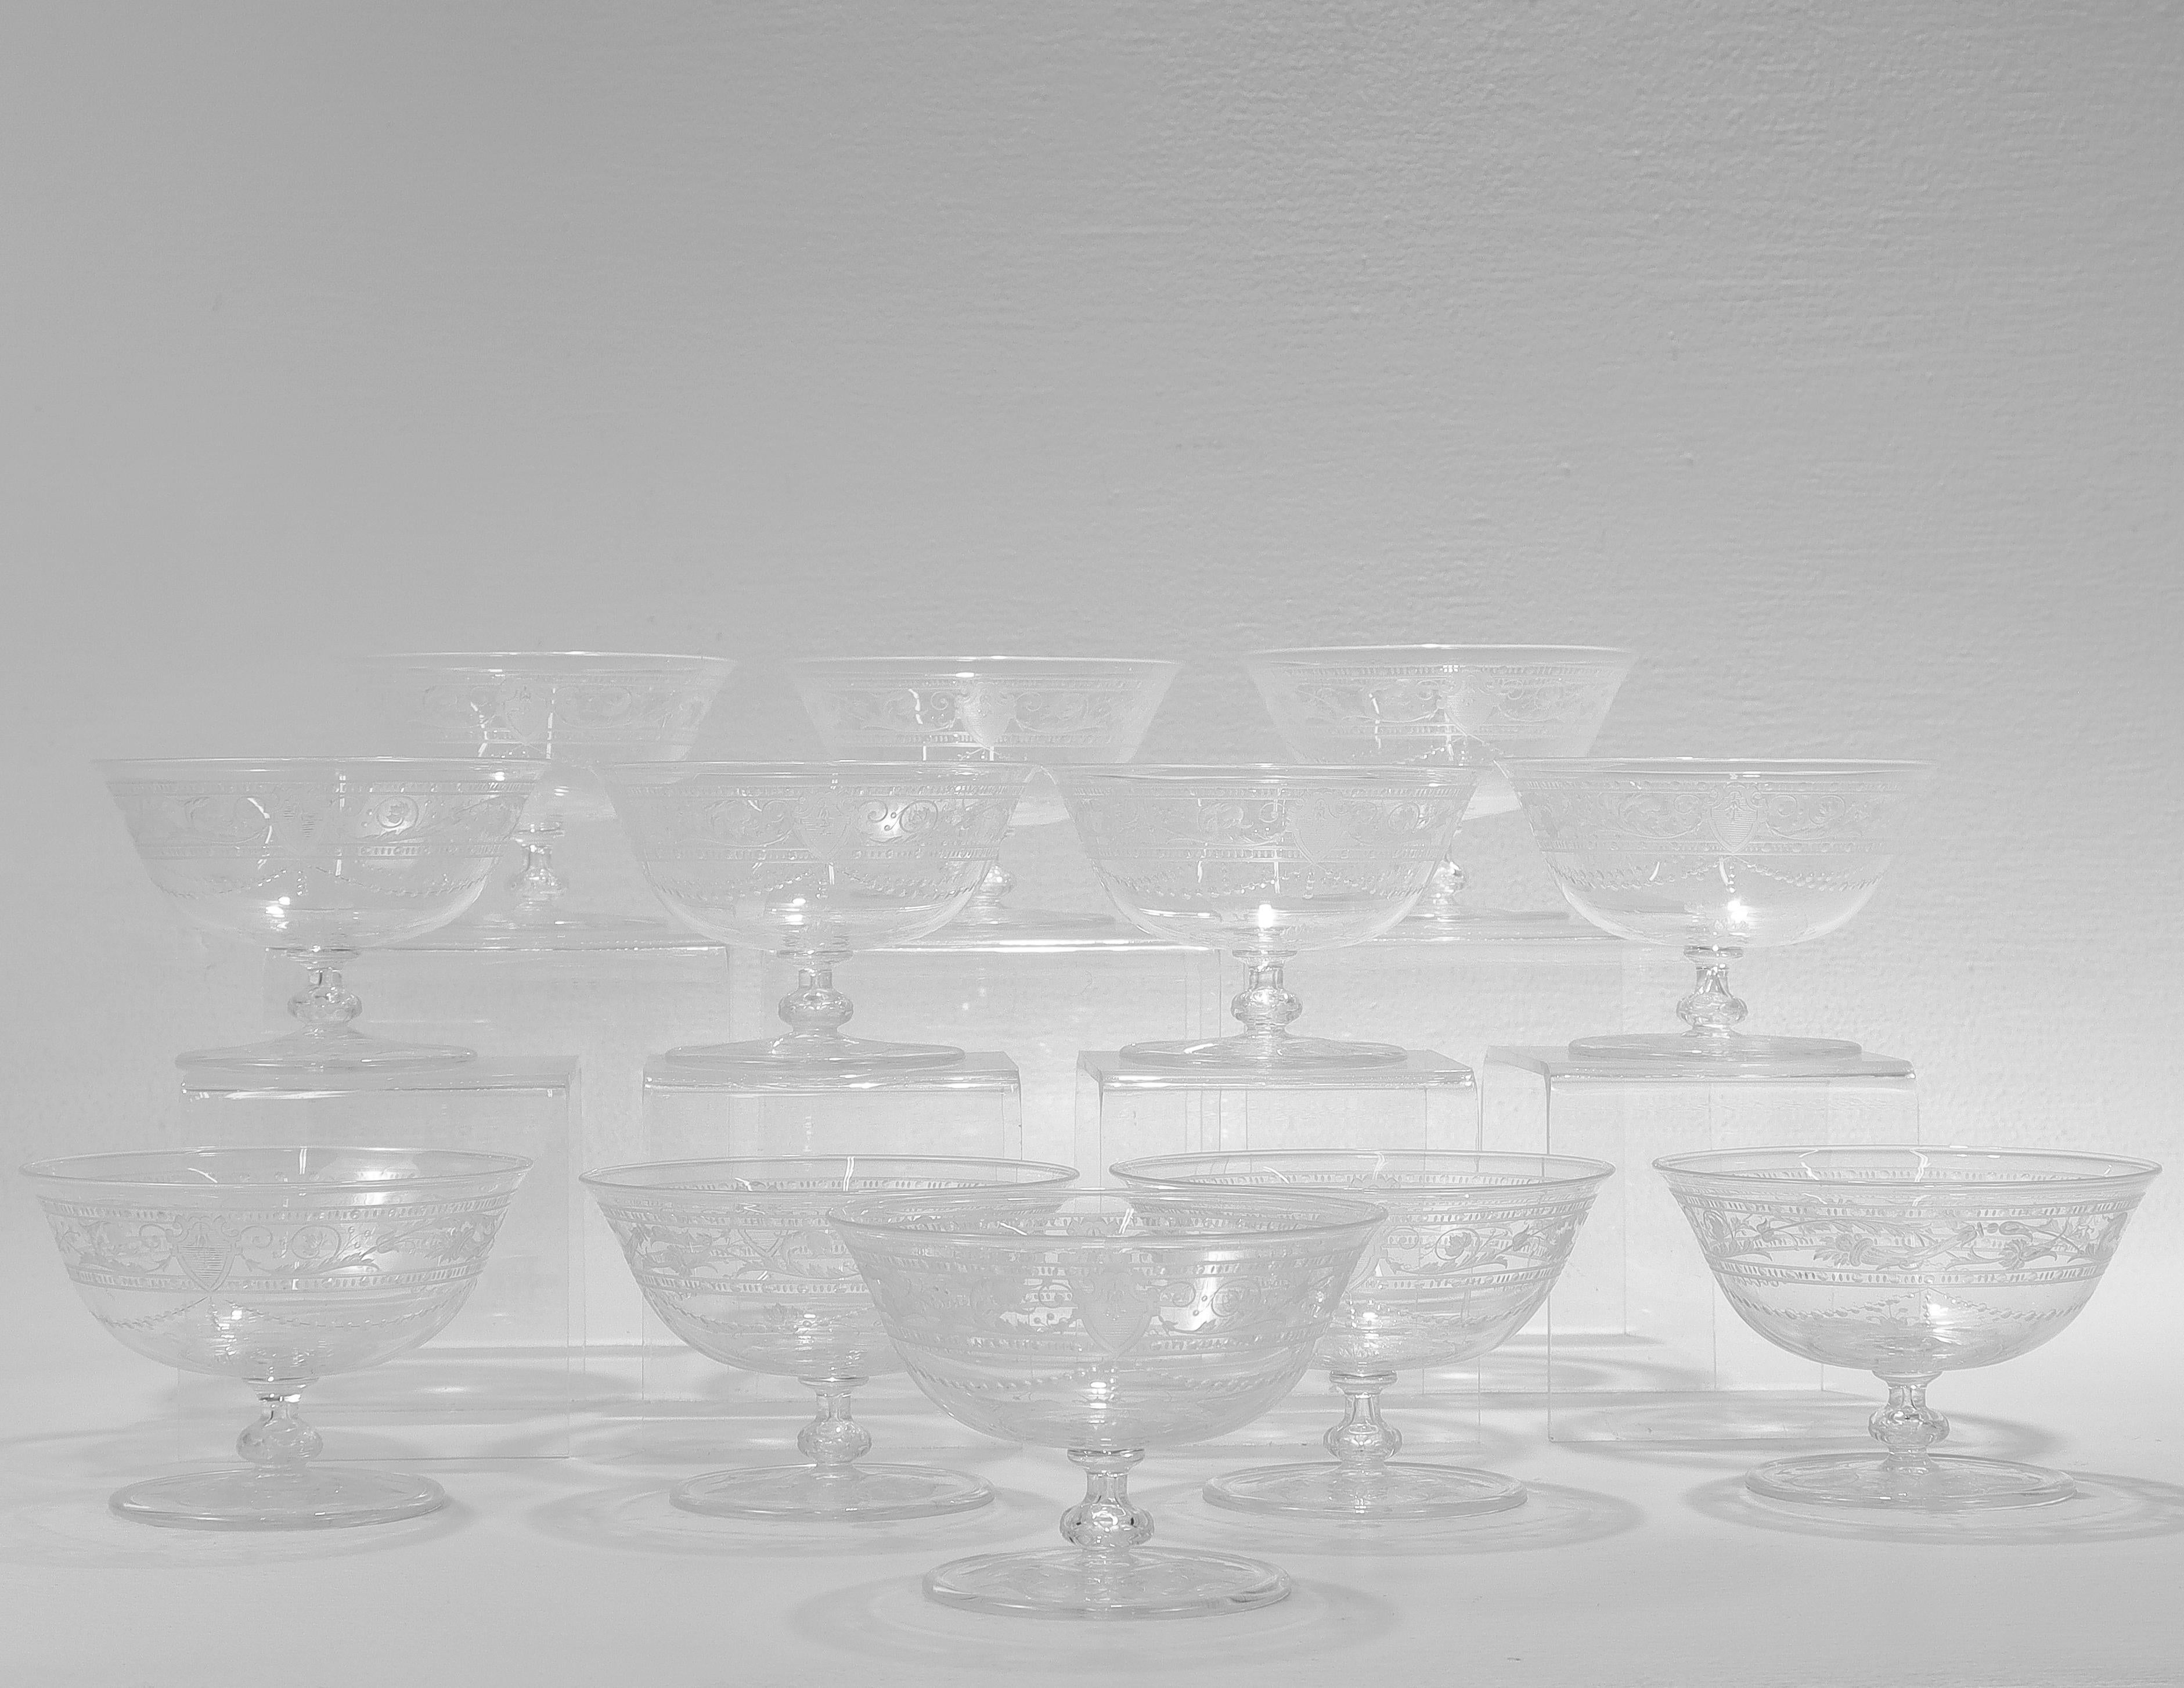 A fine set of 12 antique etched and engraved glass sherbert bowls.

Attributed to Stevens & Williams or Webb.

With engraved & etched designs trelliswork, flowers, and shield devices.

Simply a wonderful set of English art glass